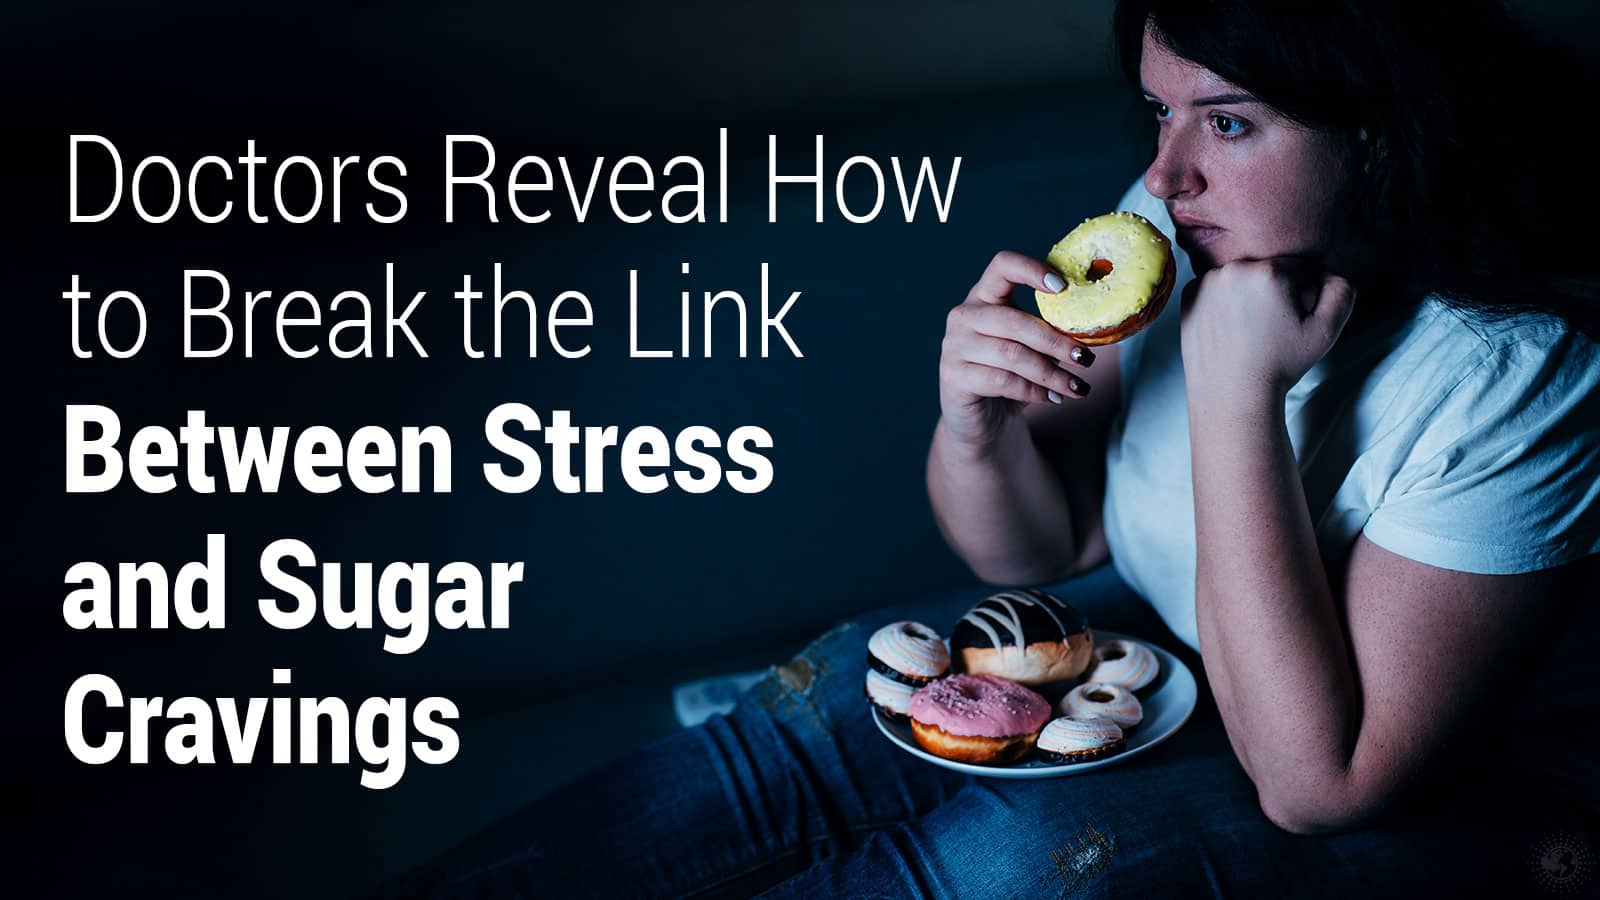 Doctors Reveal How to Break the Link Between Stress and Sugar Cravings